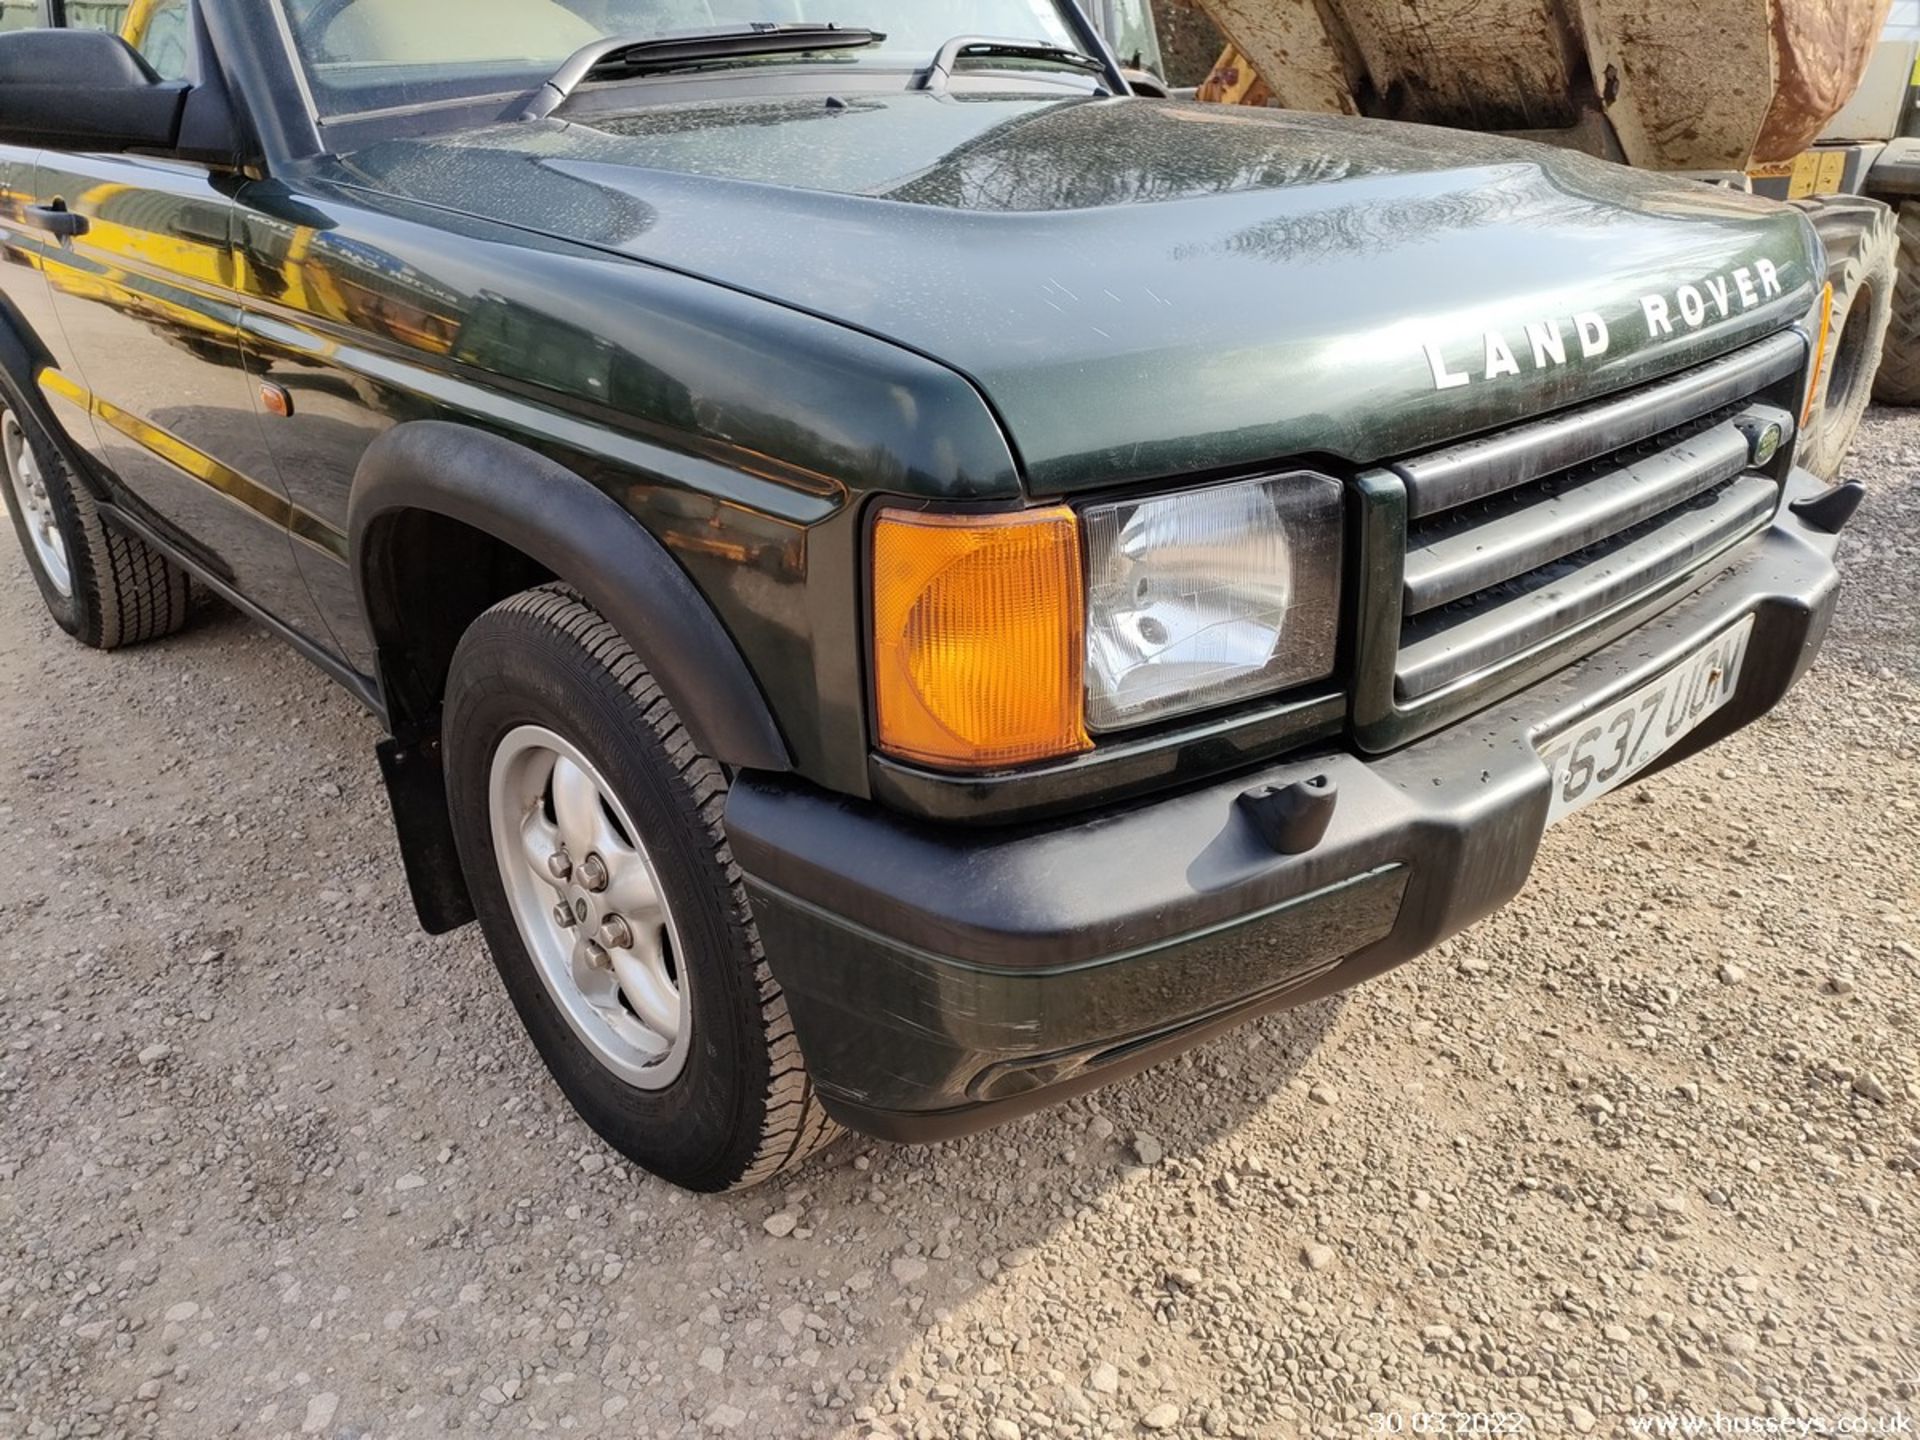 1999 LAND ROVER DISCOVERY TD5 GS - 2495cc 5dr Estate (Green) - Image 2 of 18